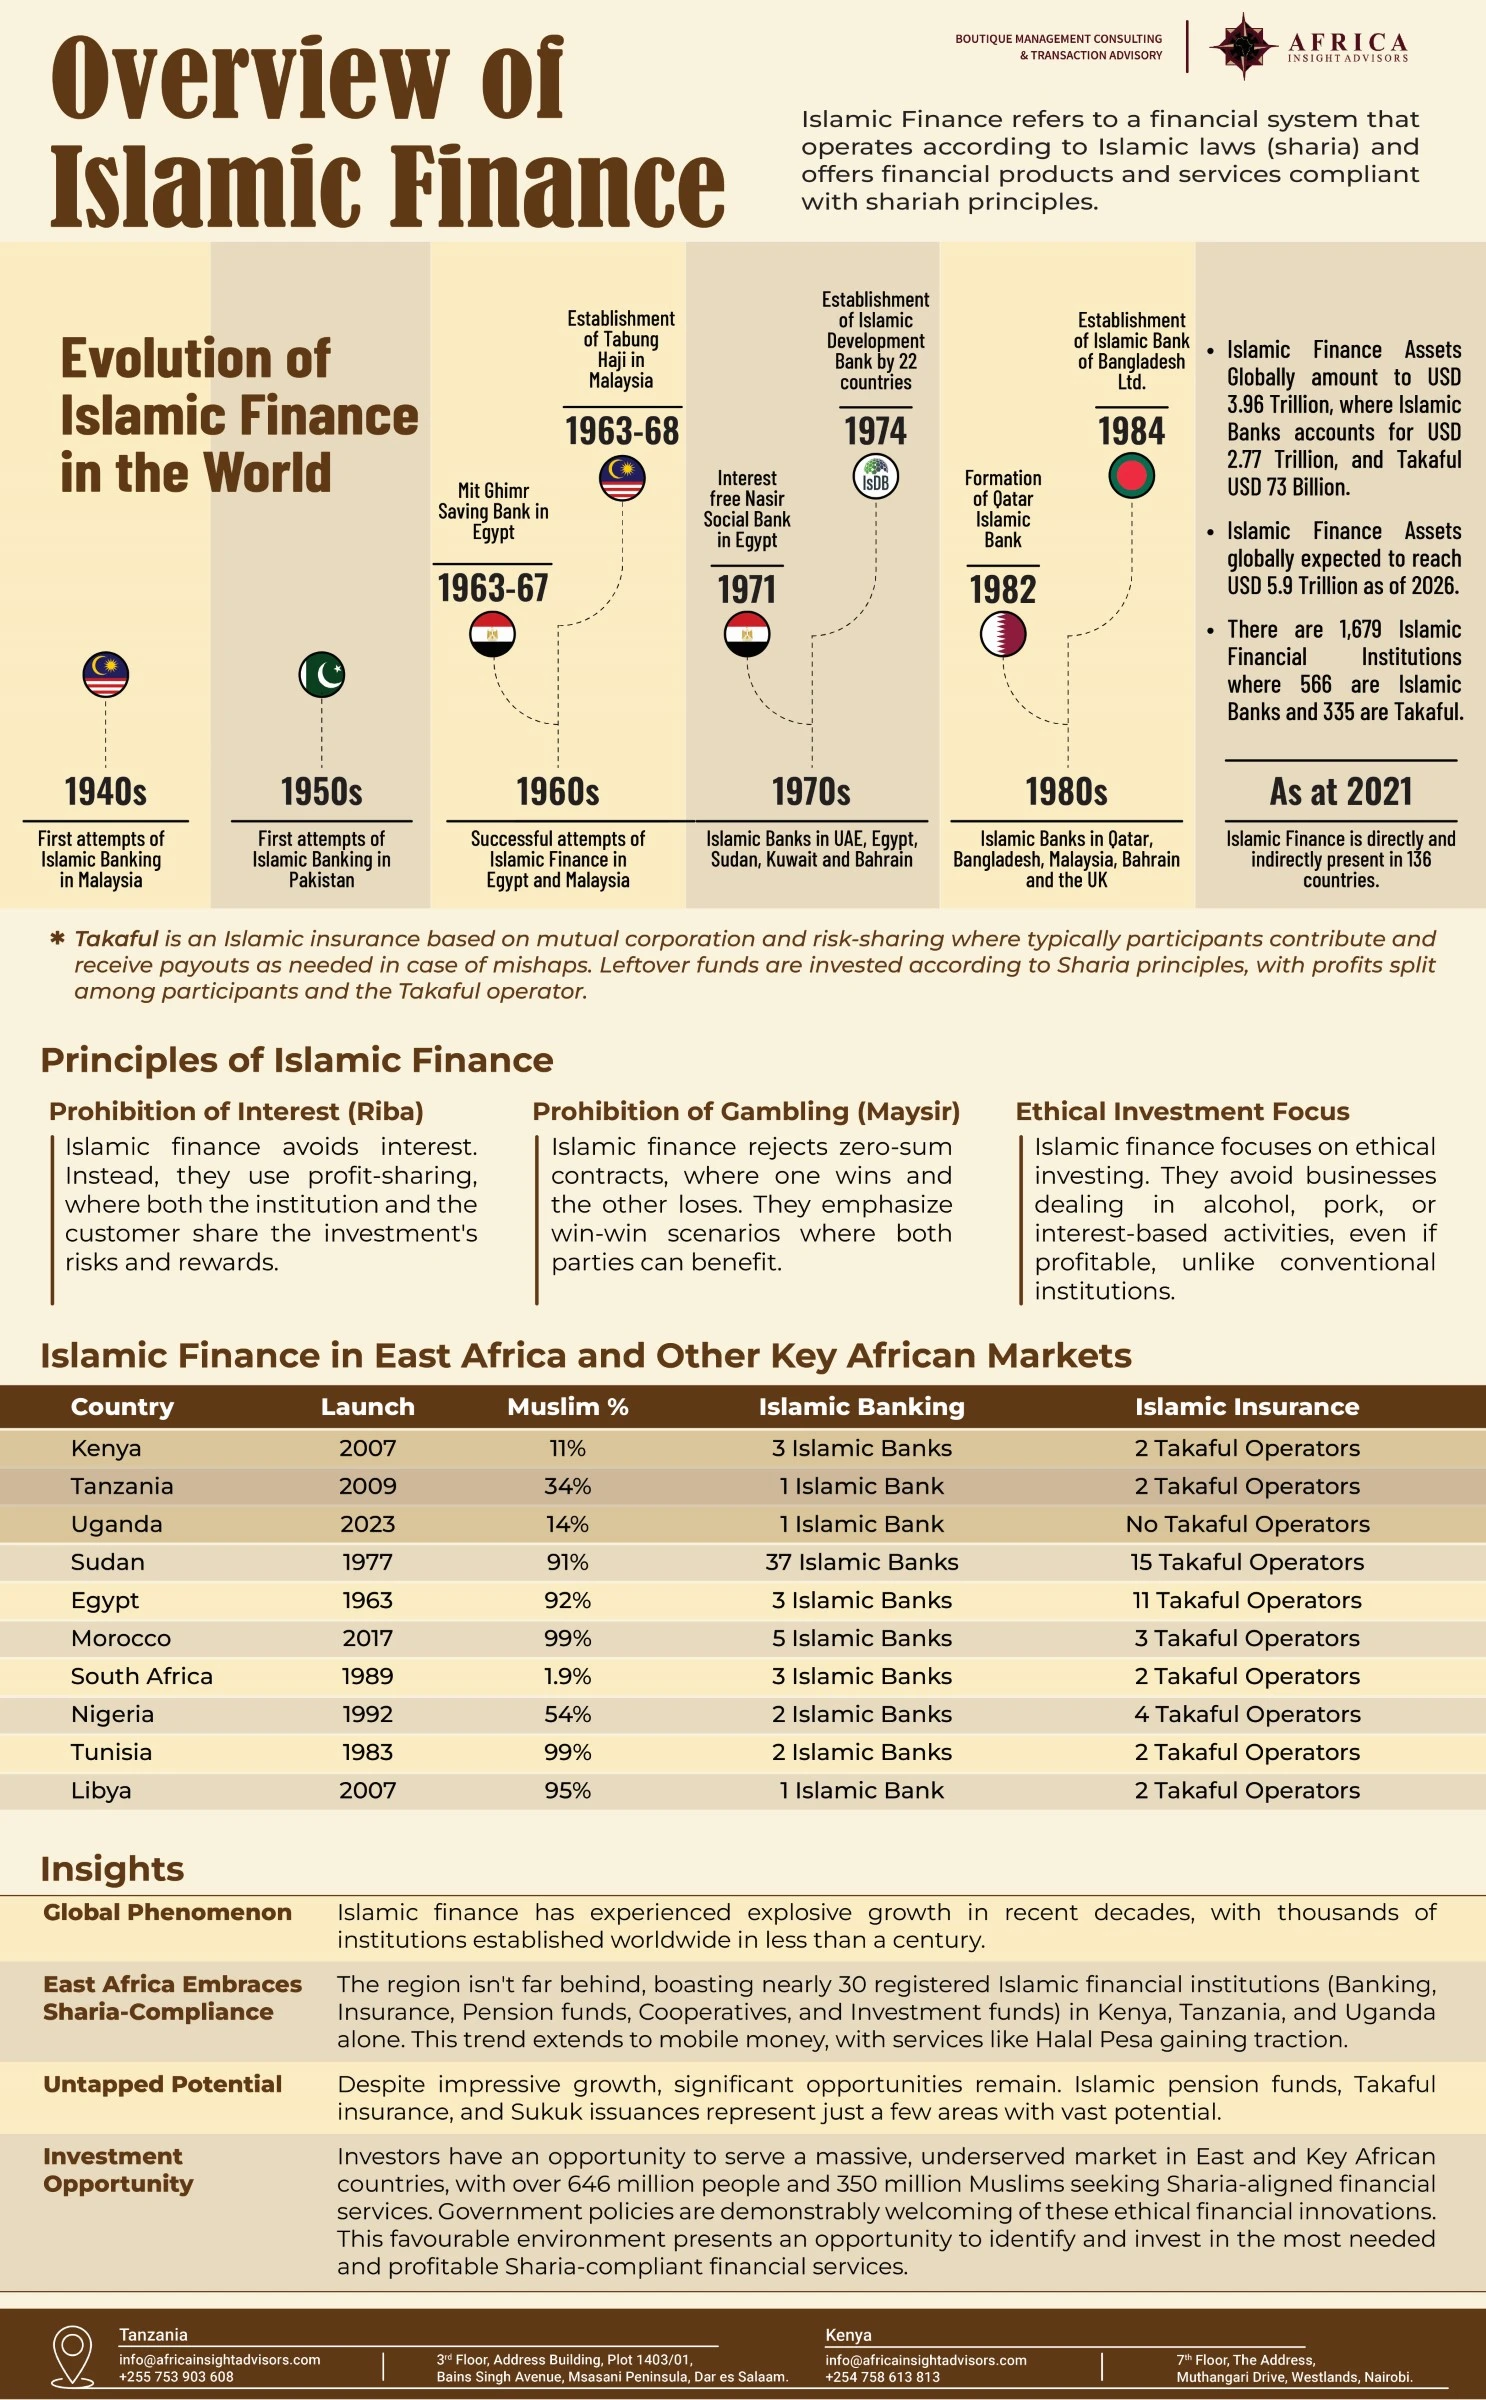 An infographic on the evolution of Islamic finance, its principles, and its burgeoning presence in East Africa, highlighting Tanzania's strategic role in this growth.